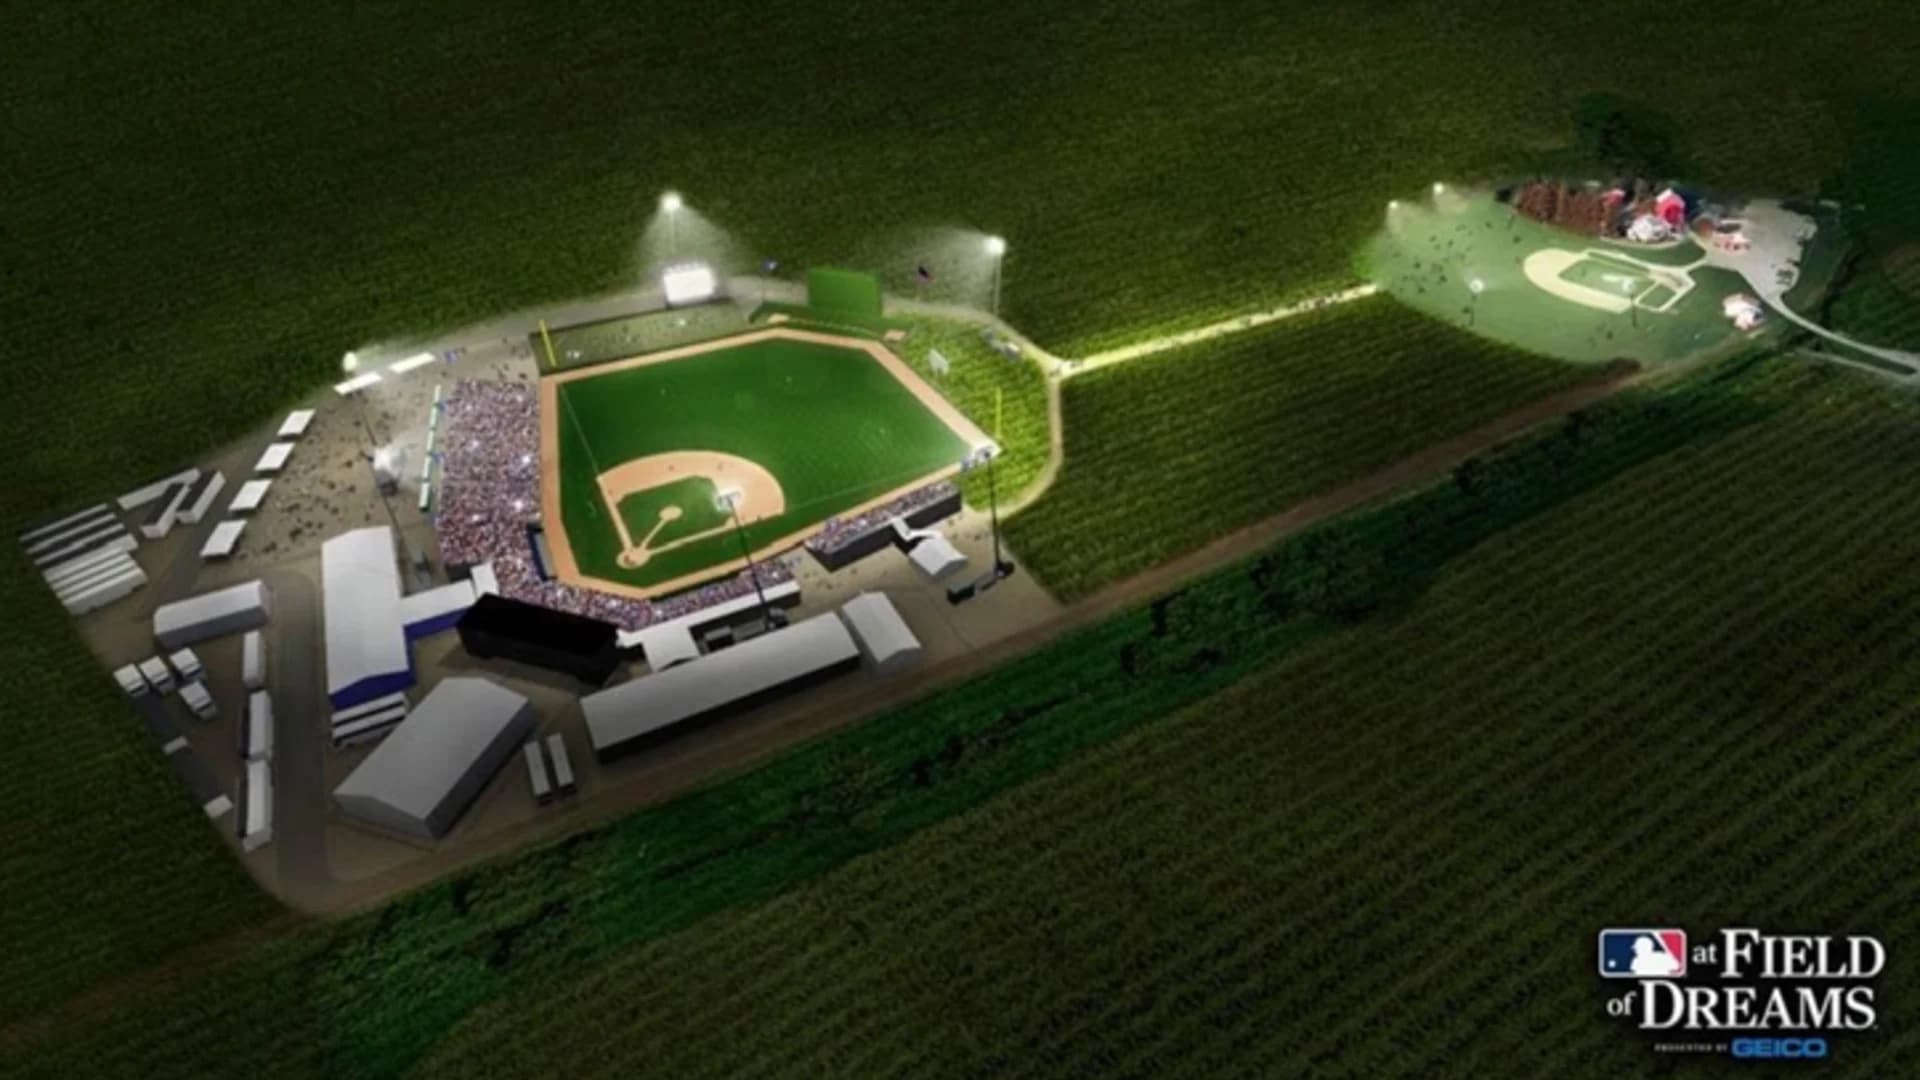 White Sox, Yankees to play at ‘Field of Dreams’ in 2020